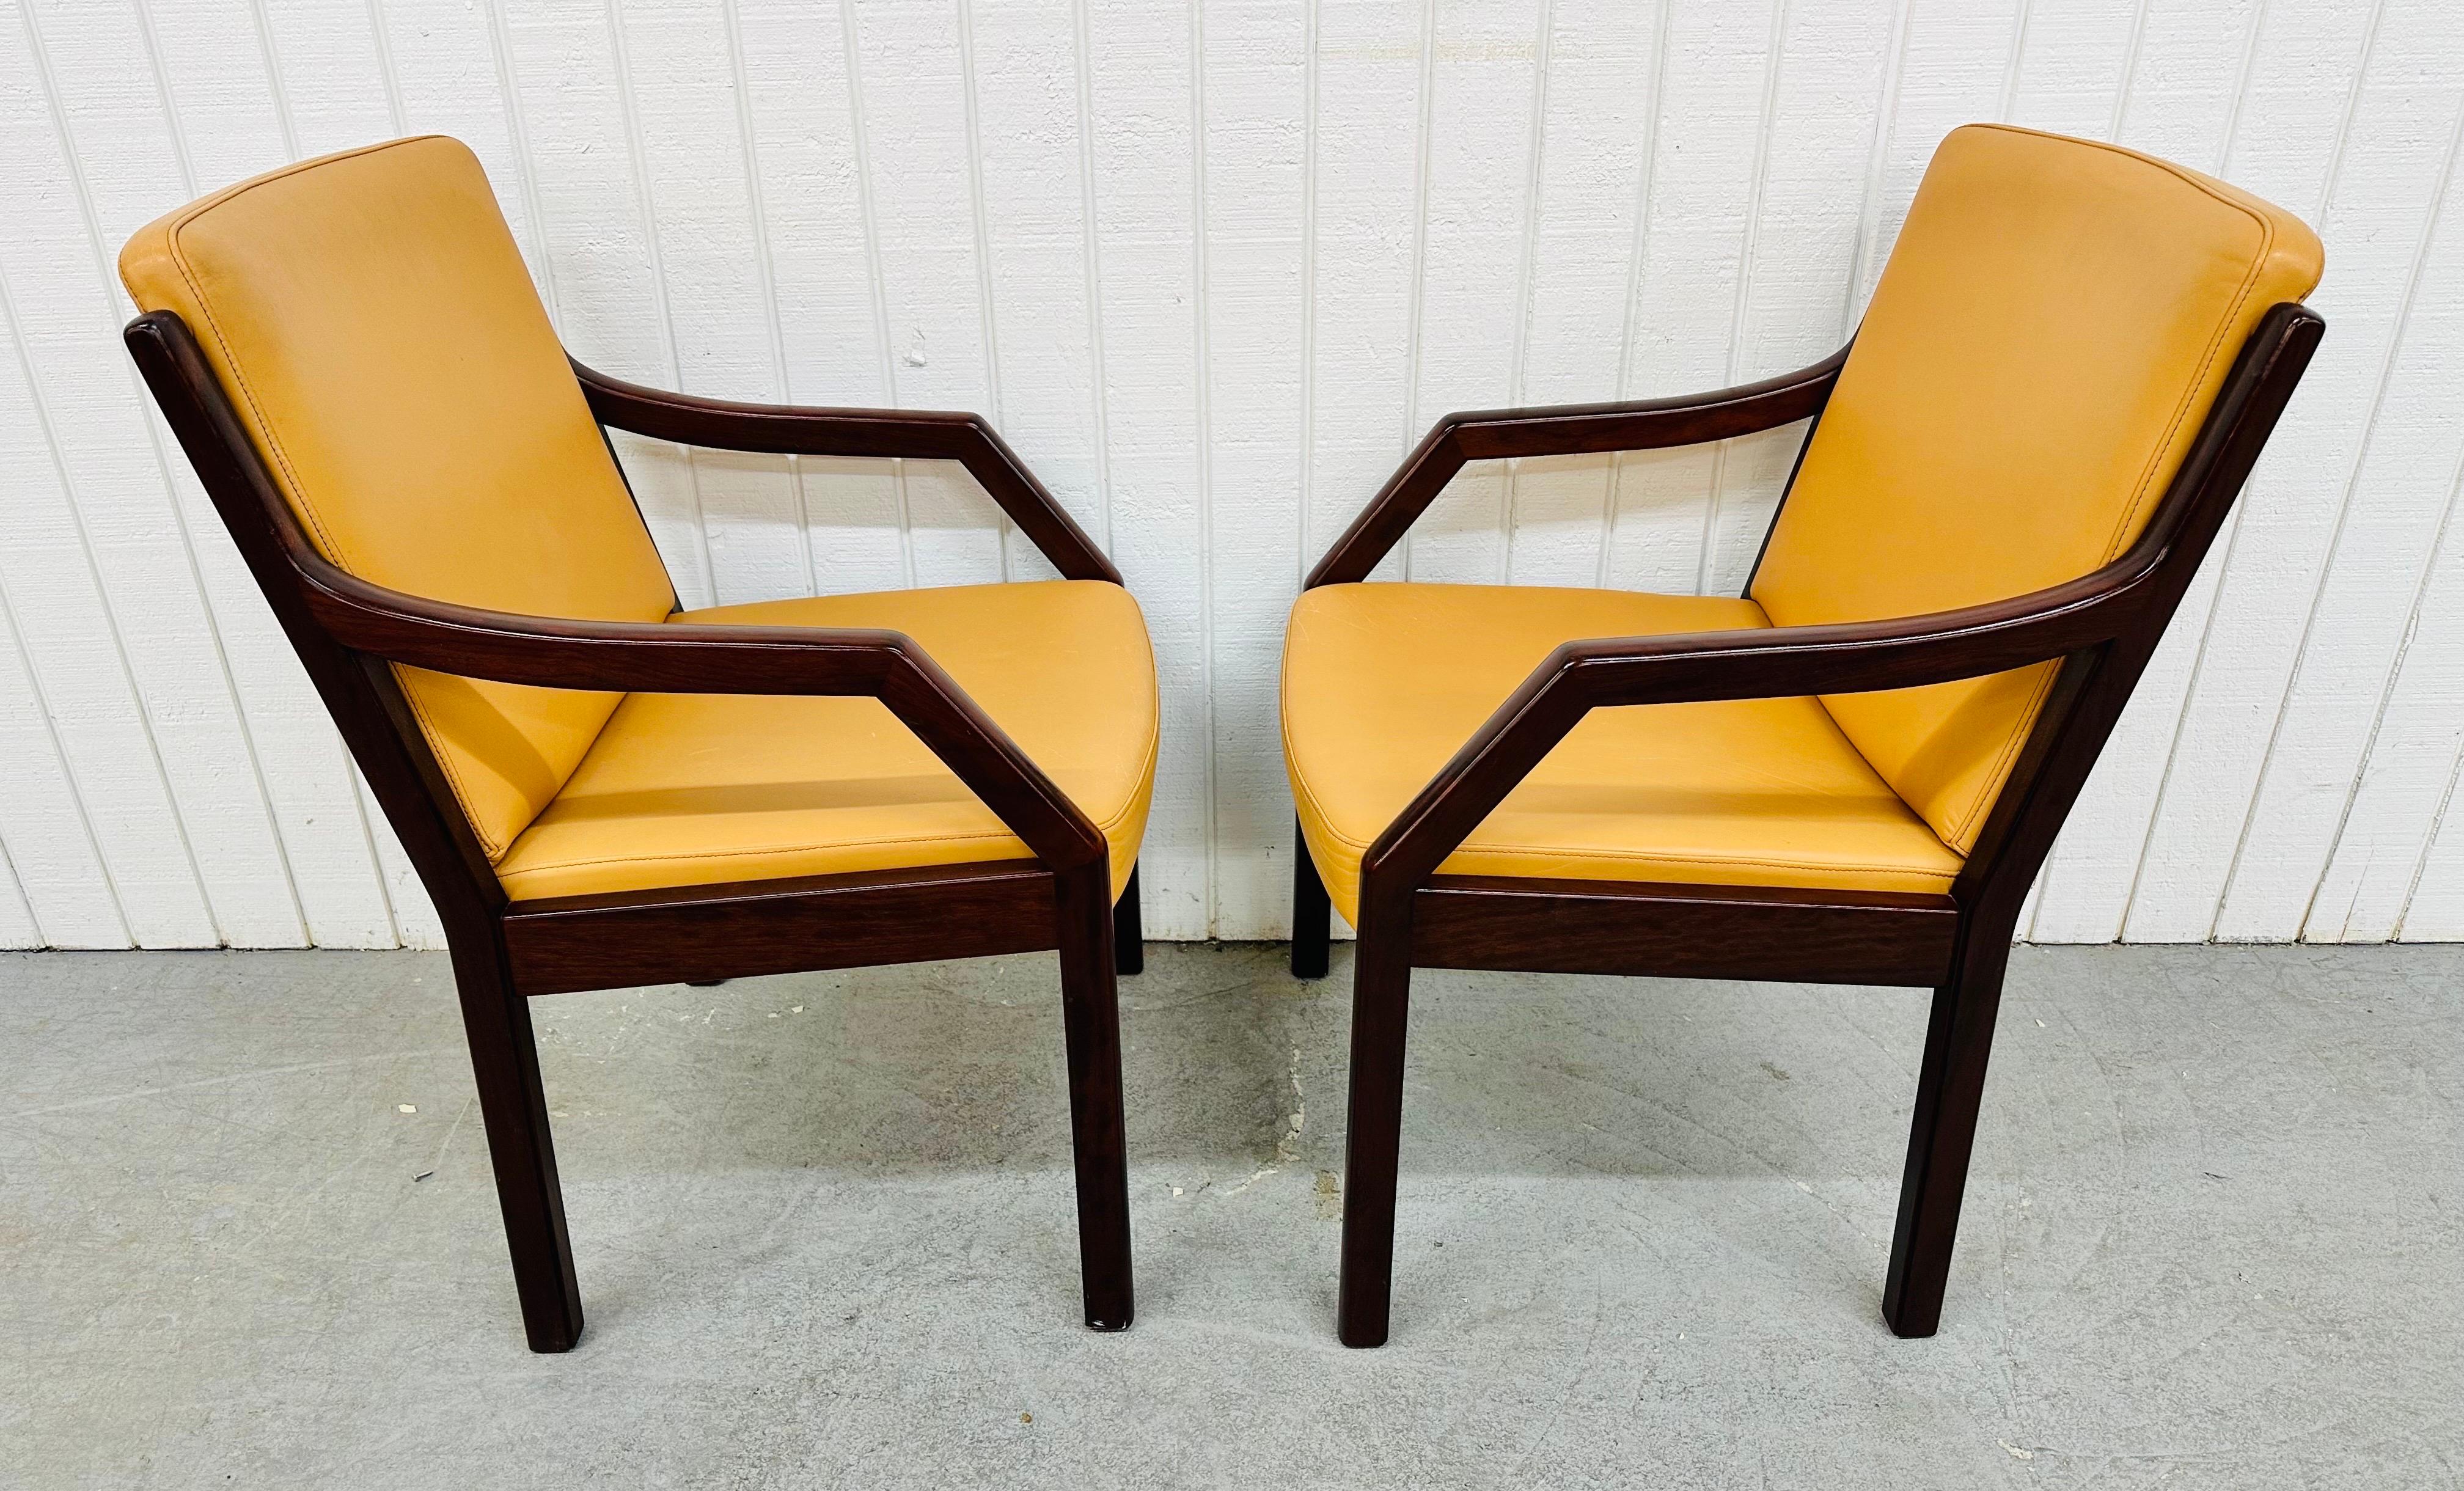 20th Century Vintage Dunbar Lounge Chairs - Set of 2 For Sale